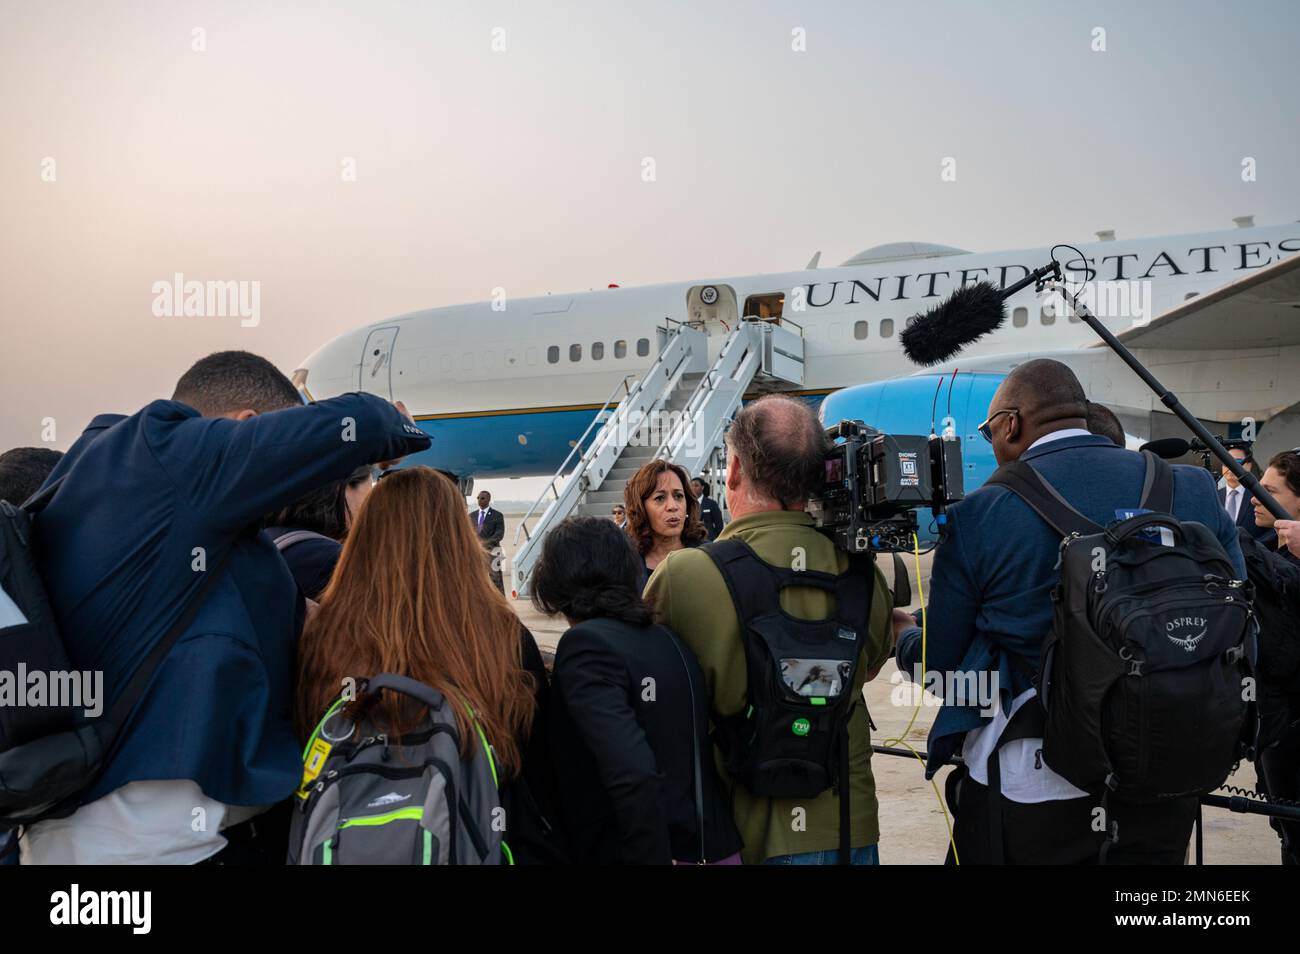 https://c8.alamy.com/comp/2MN6EEK/vice-president-of-the-united-states-kamala-d-harris-addresses-the-press-core-at-osan-air-base-republic-of-korea-sept-29-2022-harriss-trip-was-intended-to-underscore-the-us-rok-alliance-and-to-deepen-ties-in-the-indo-pacific-region-2MN6EEK.jpg